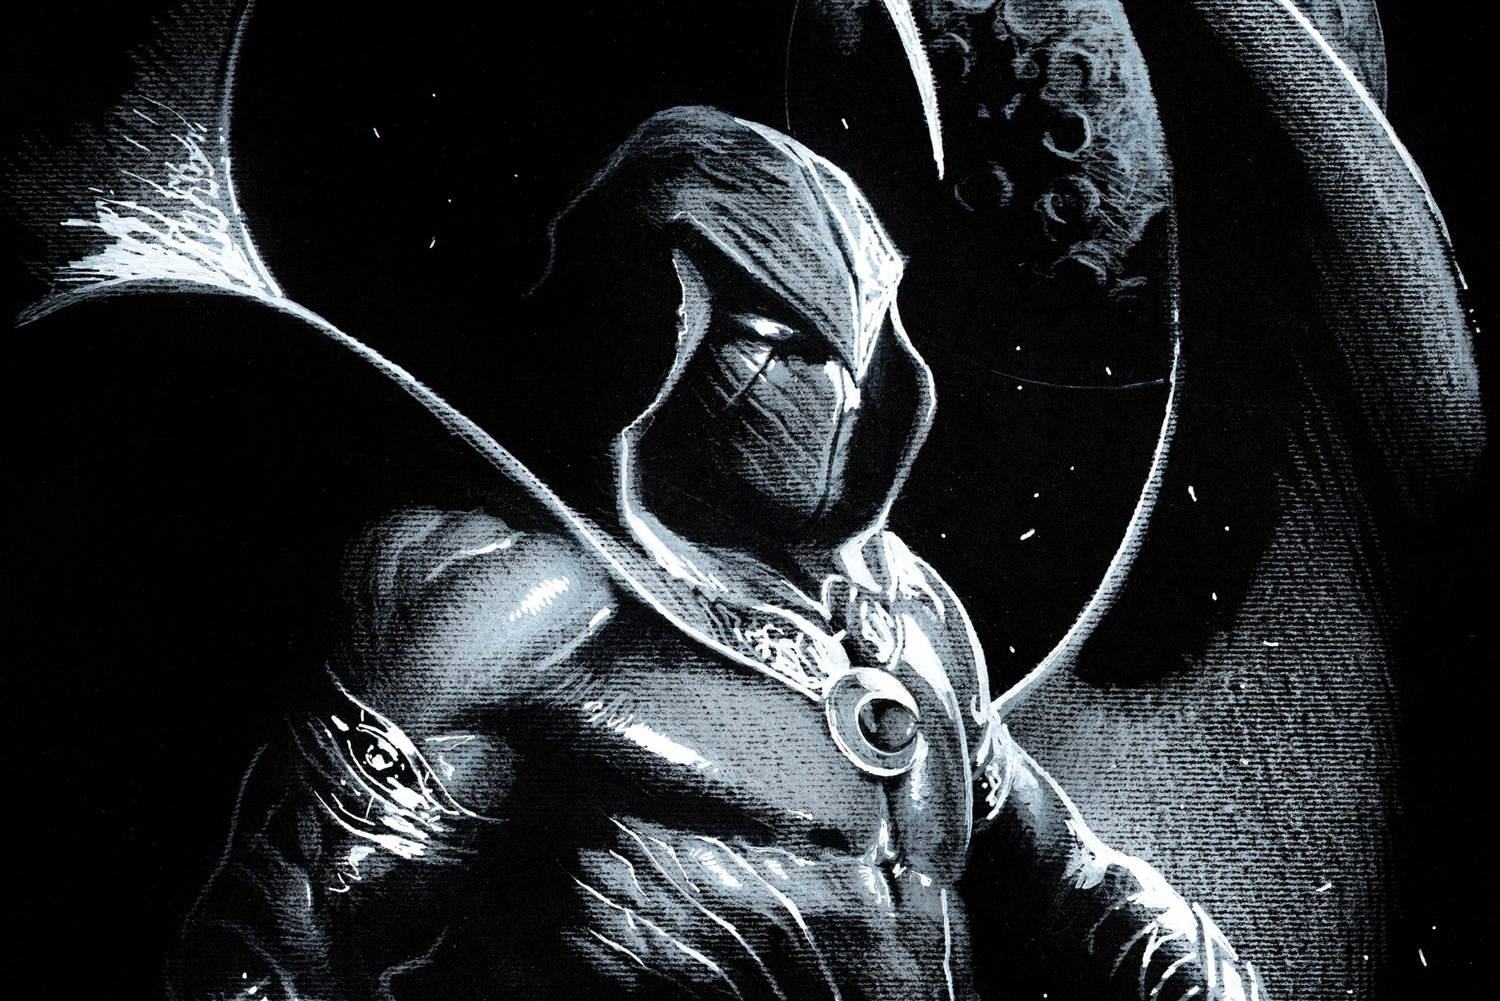 Moon Knight Quotes -  Moon Knight is a very interesting character, and his quotes really make an impression on readers